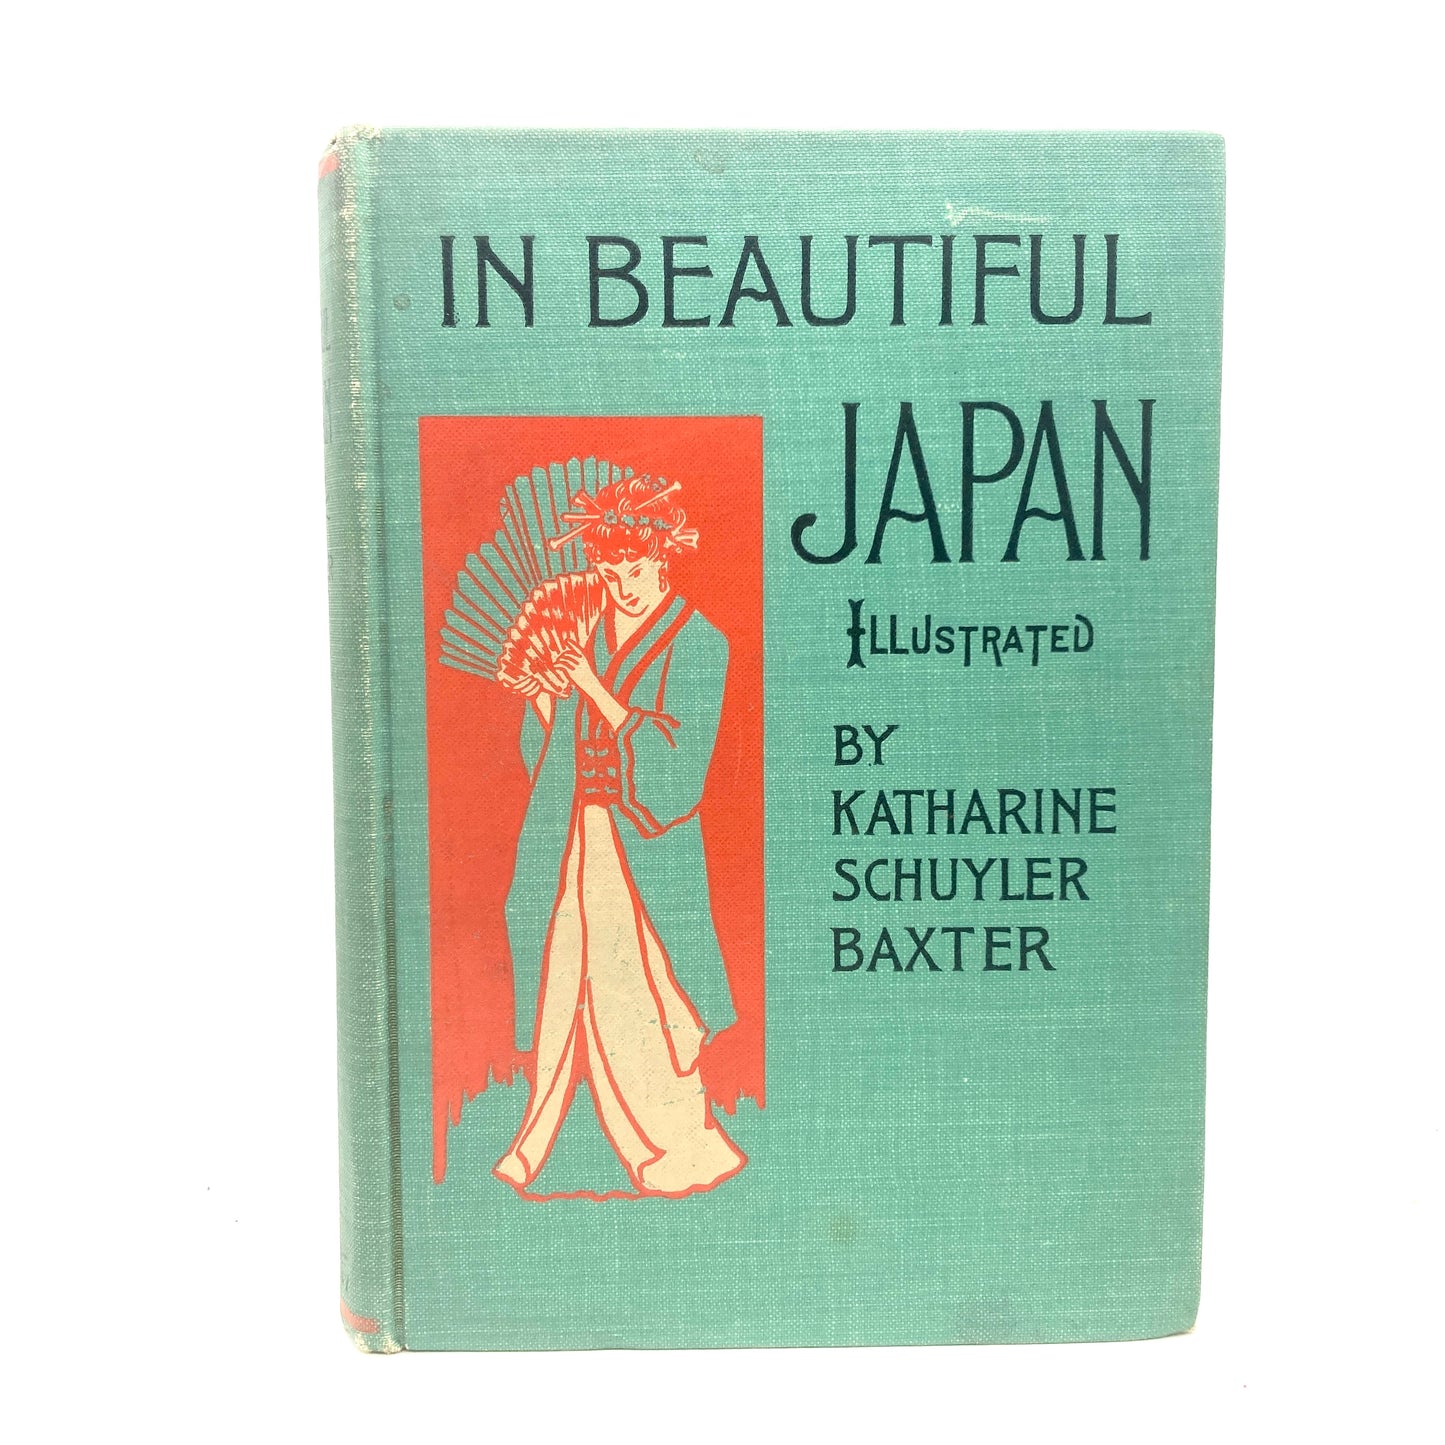 BAXTER, Katharine Schuyler "In Beautiful Japan" [The Hobart Company, 1904] - Buzz Bookstore